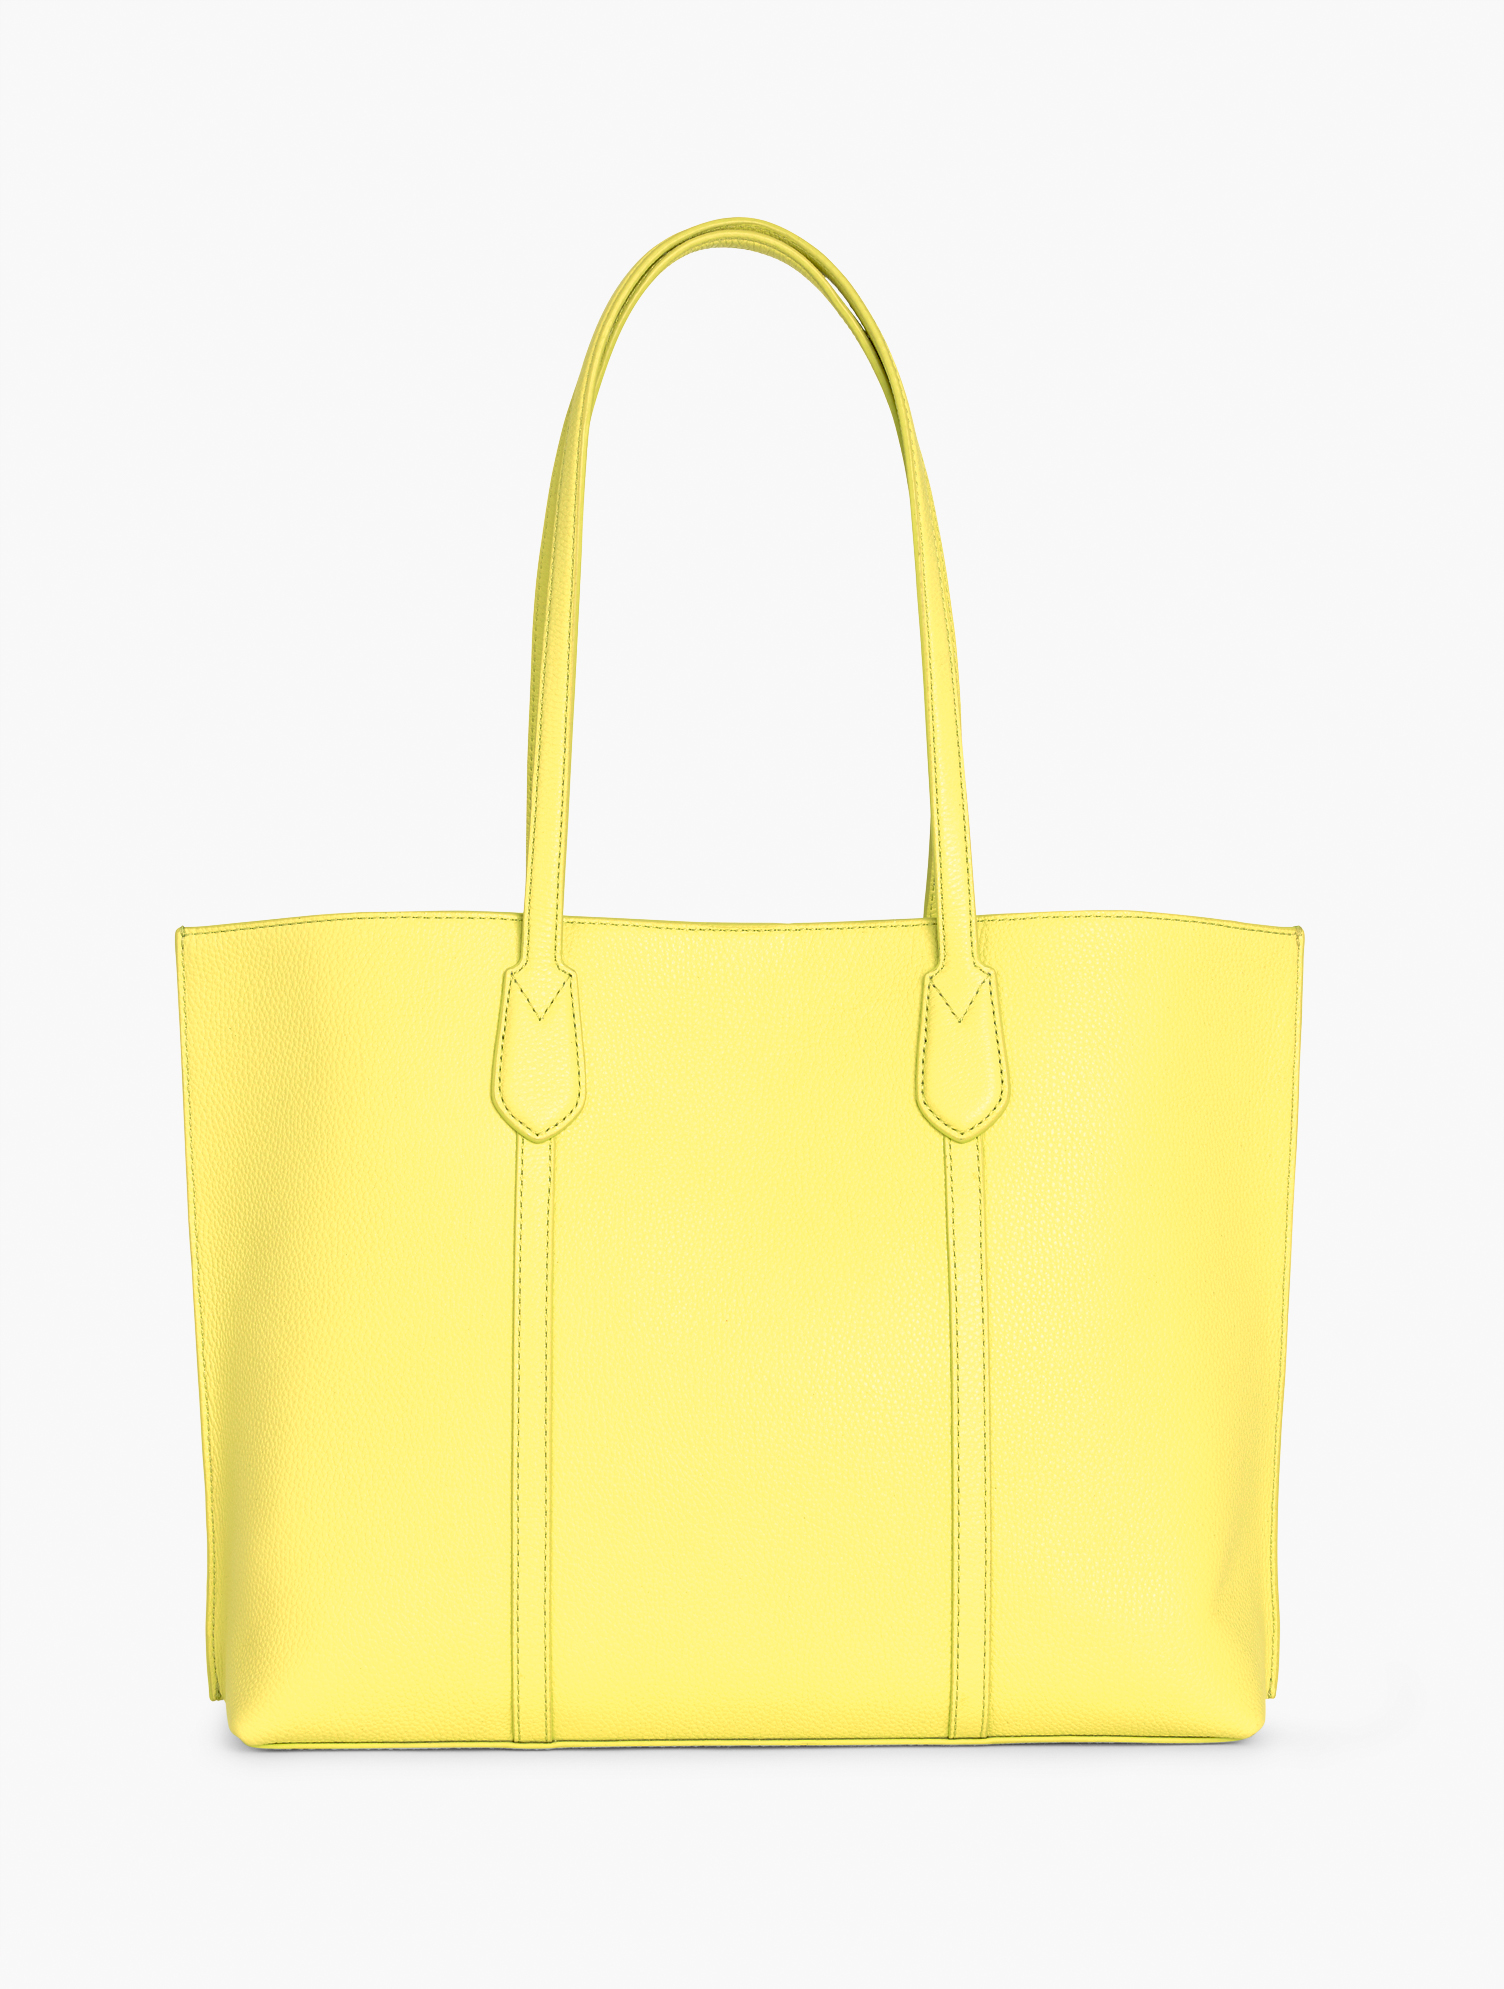 Talbots Leather Tote - Lime Citron - 001